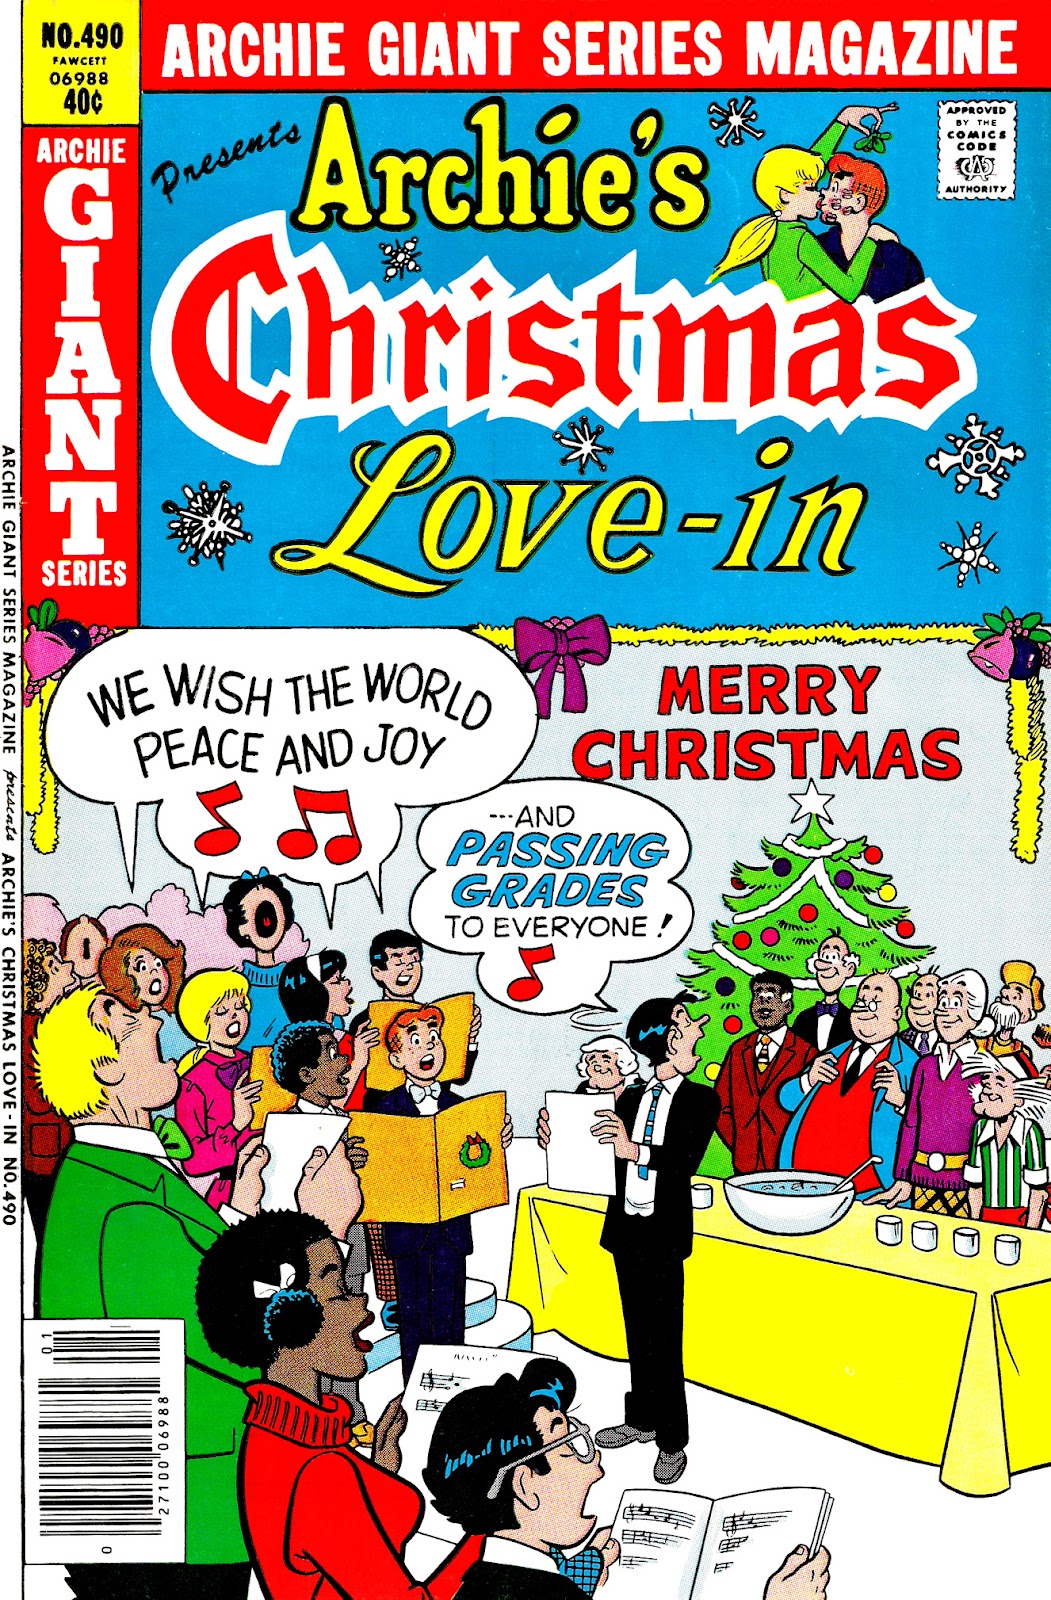 Archie Giant Series Magazine 490 Page 1